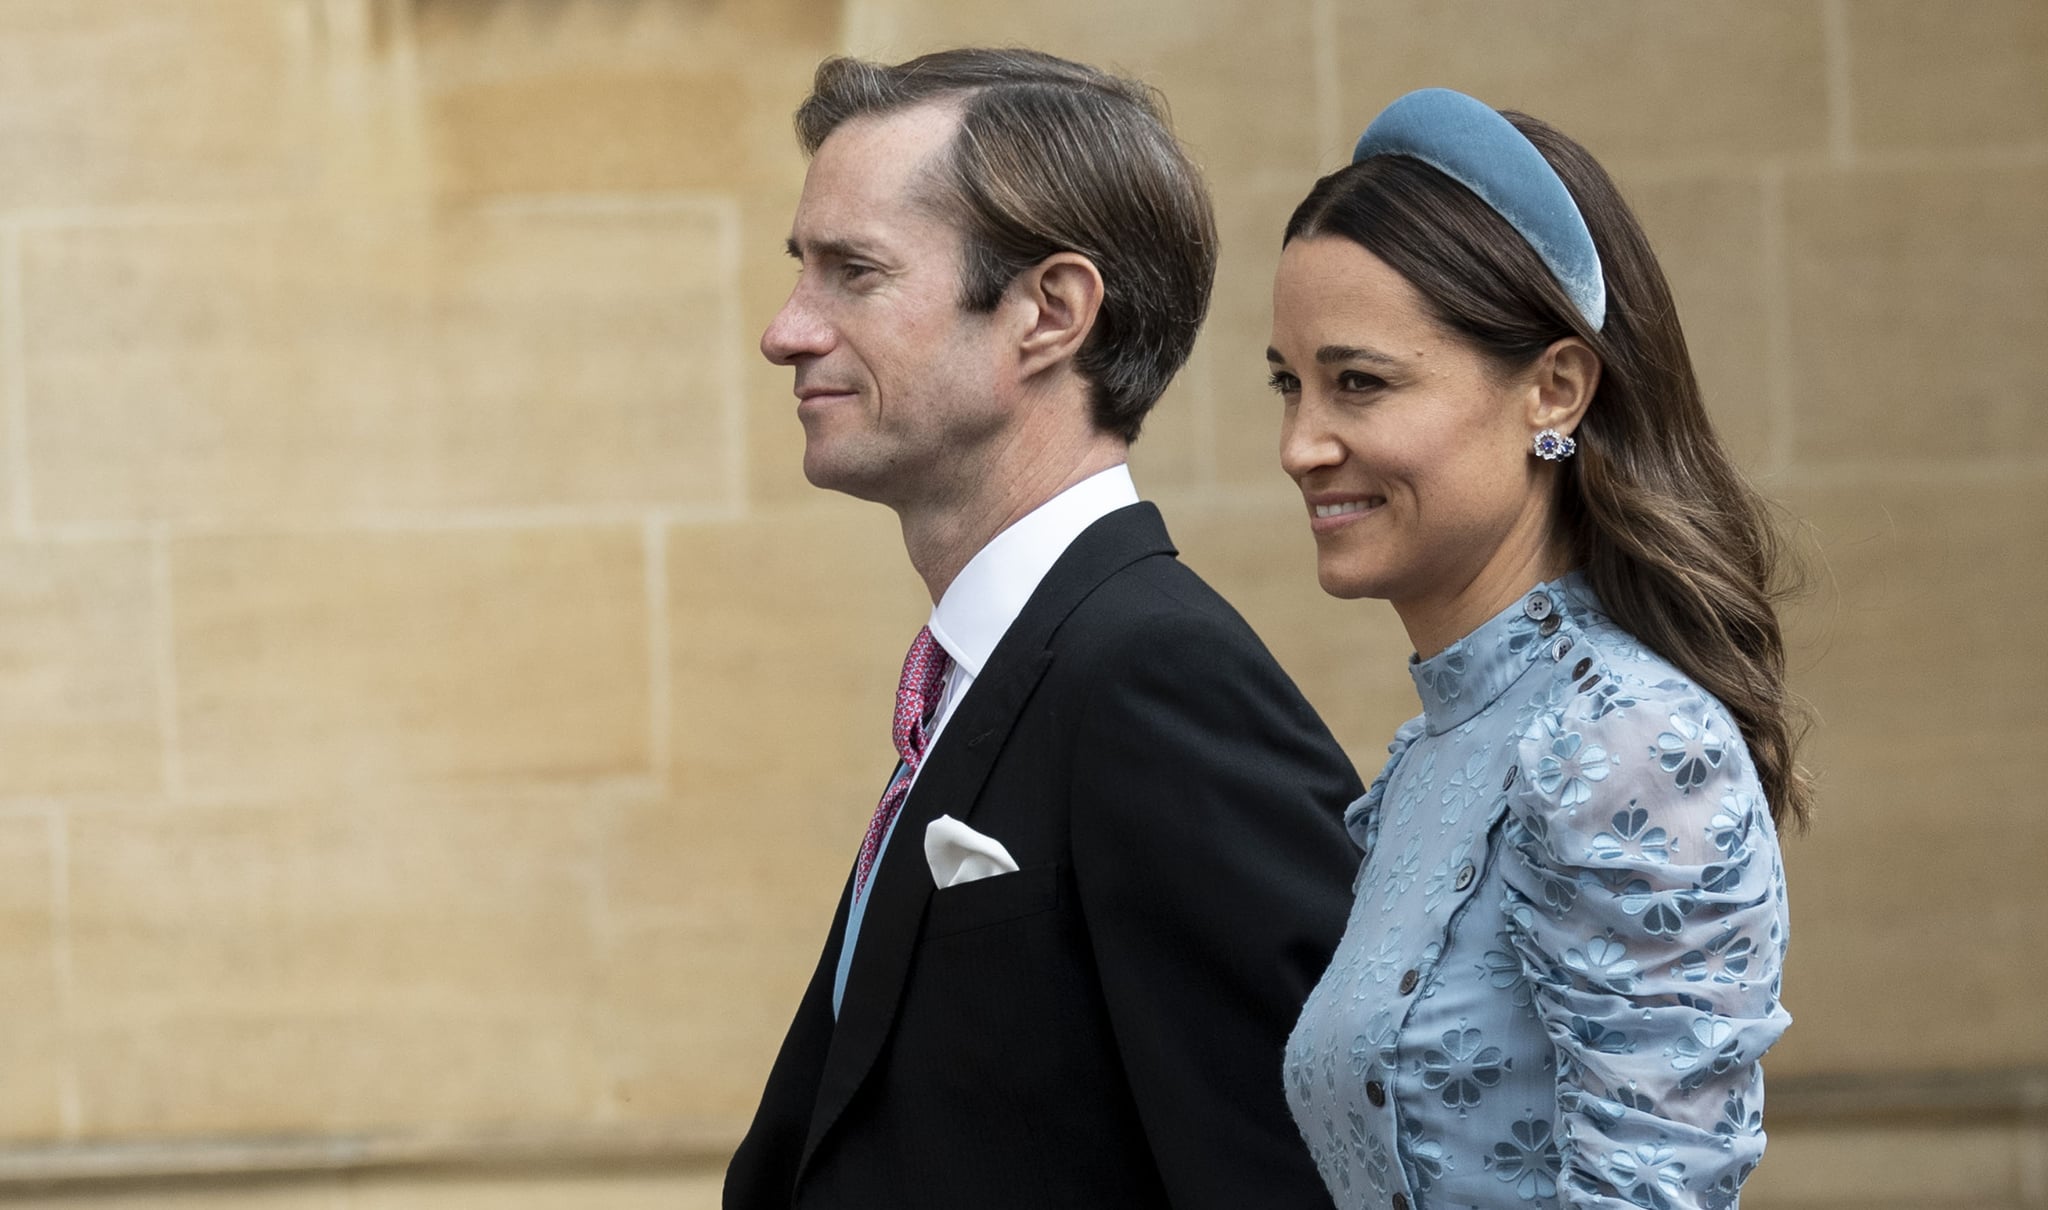 WINDSOR, ENGLAND - MAY 18: Pippa Matthews and James Matthews attend the Wedding of Lady Gabriella Windsor and Mr Thomas Kingston at St George's Chapel at Windsor Castle on May 18, 2019 in Windsor, England.  (Photo by Mark Cuthbert/UK Press via Getty Images)